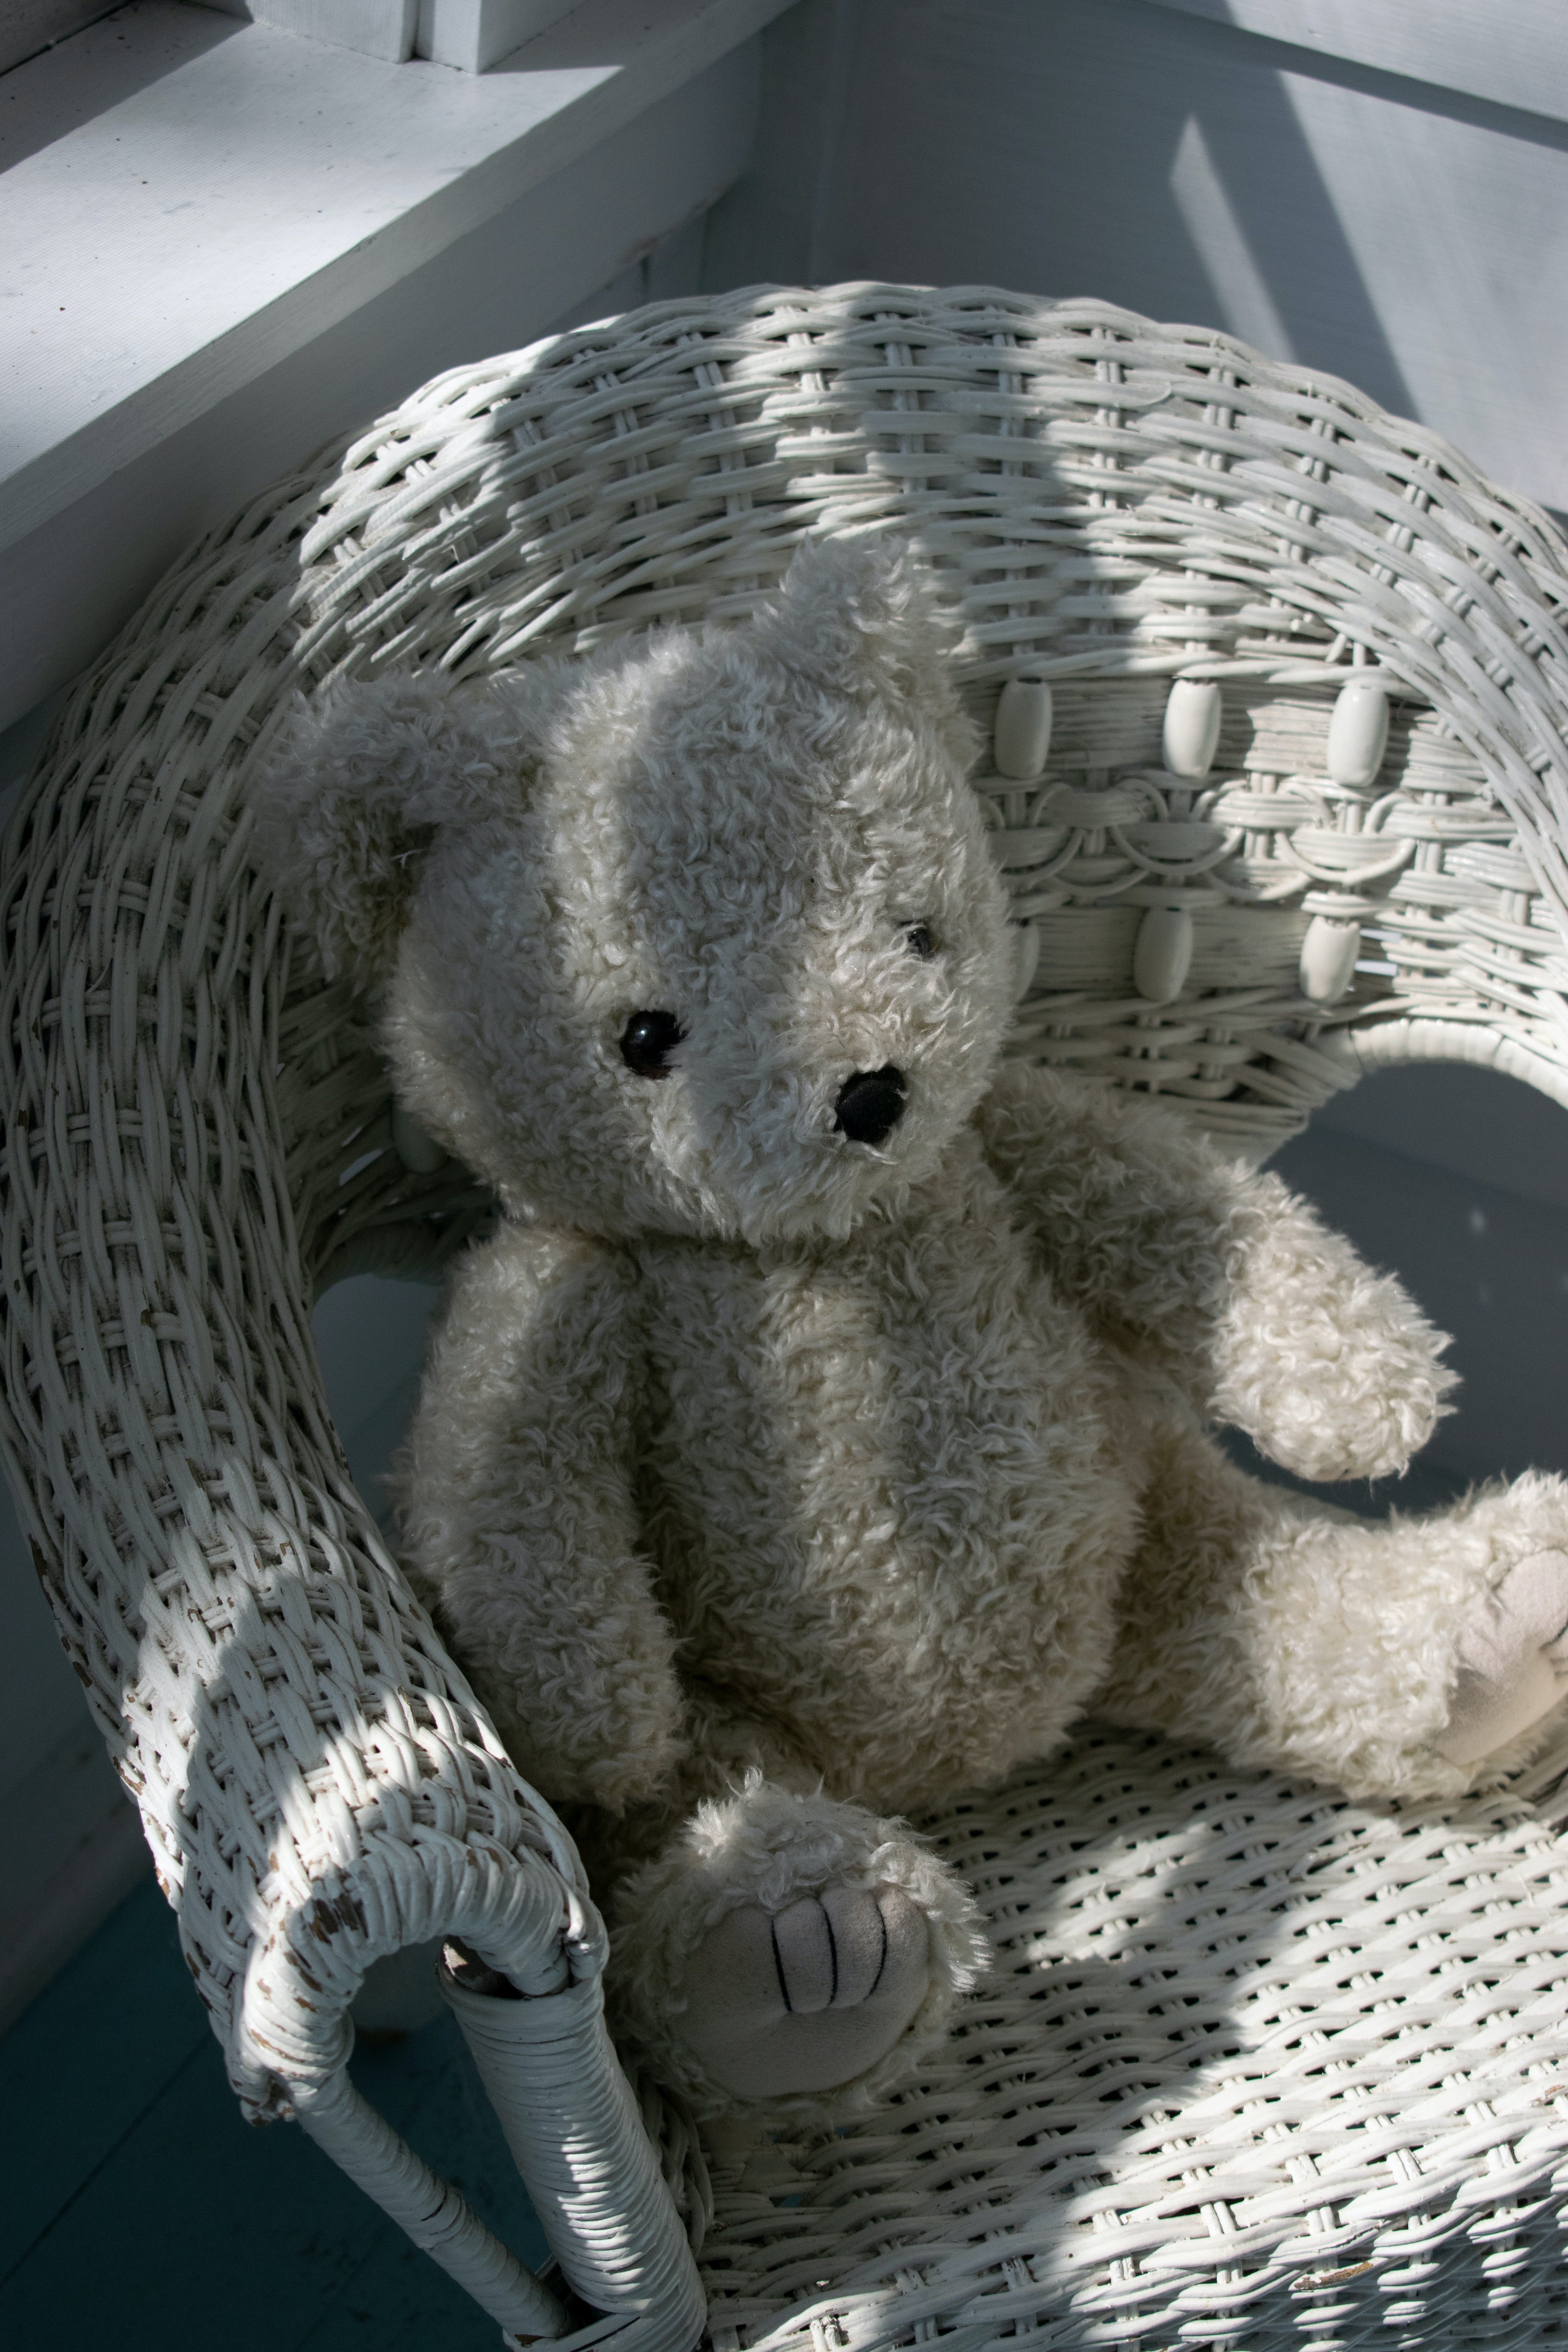 Lacey put a nanny cam hidden in a teddy bear in Chris' room. | Source: Unsplash